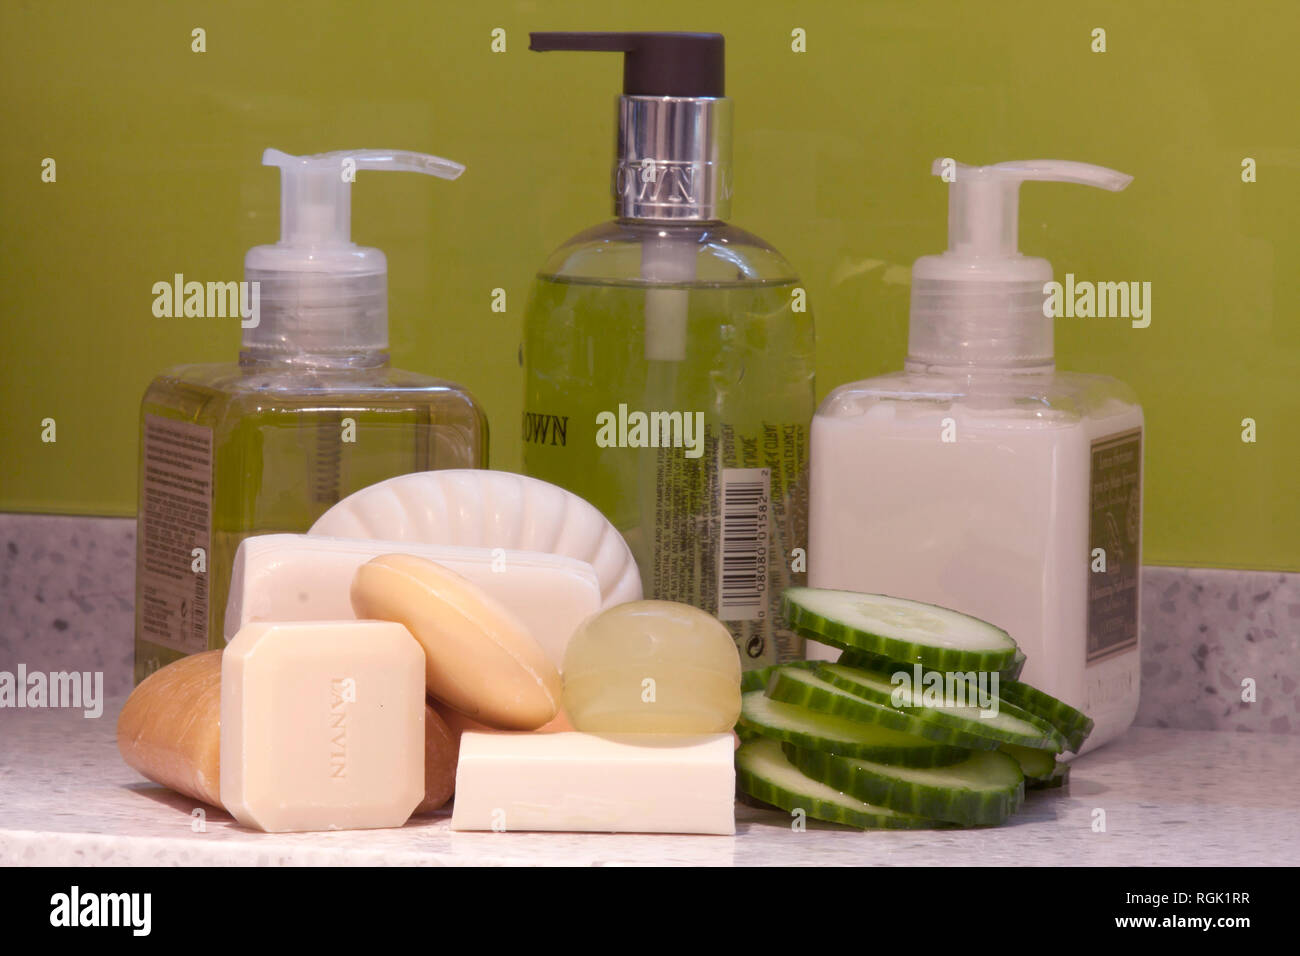 variety of natural & liquid soaps with slices of cucumber Stock Photo